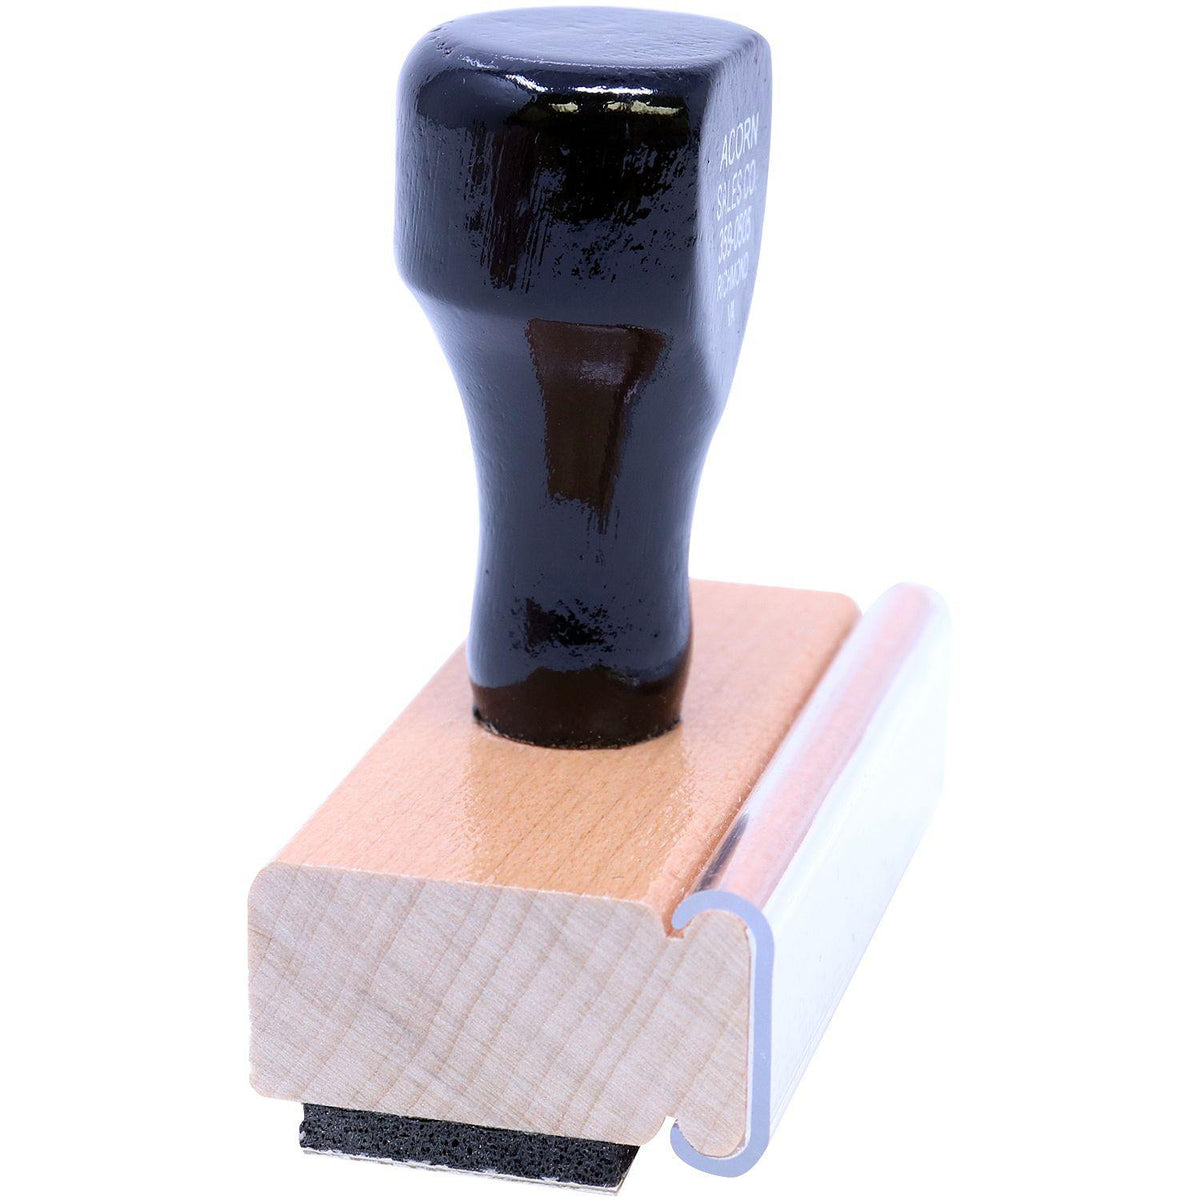 Side View of Copy For Your Information Rubber Stamp at an Angle